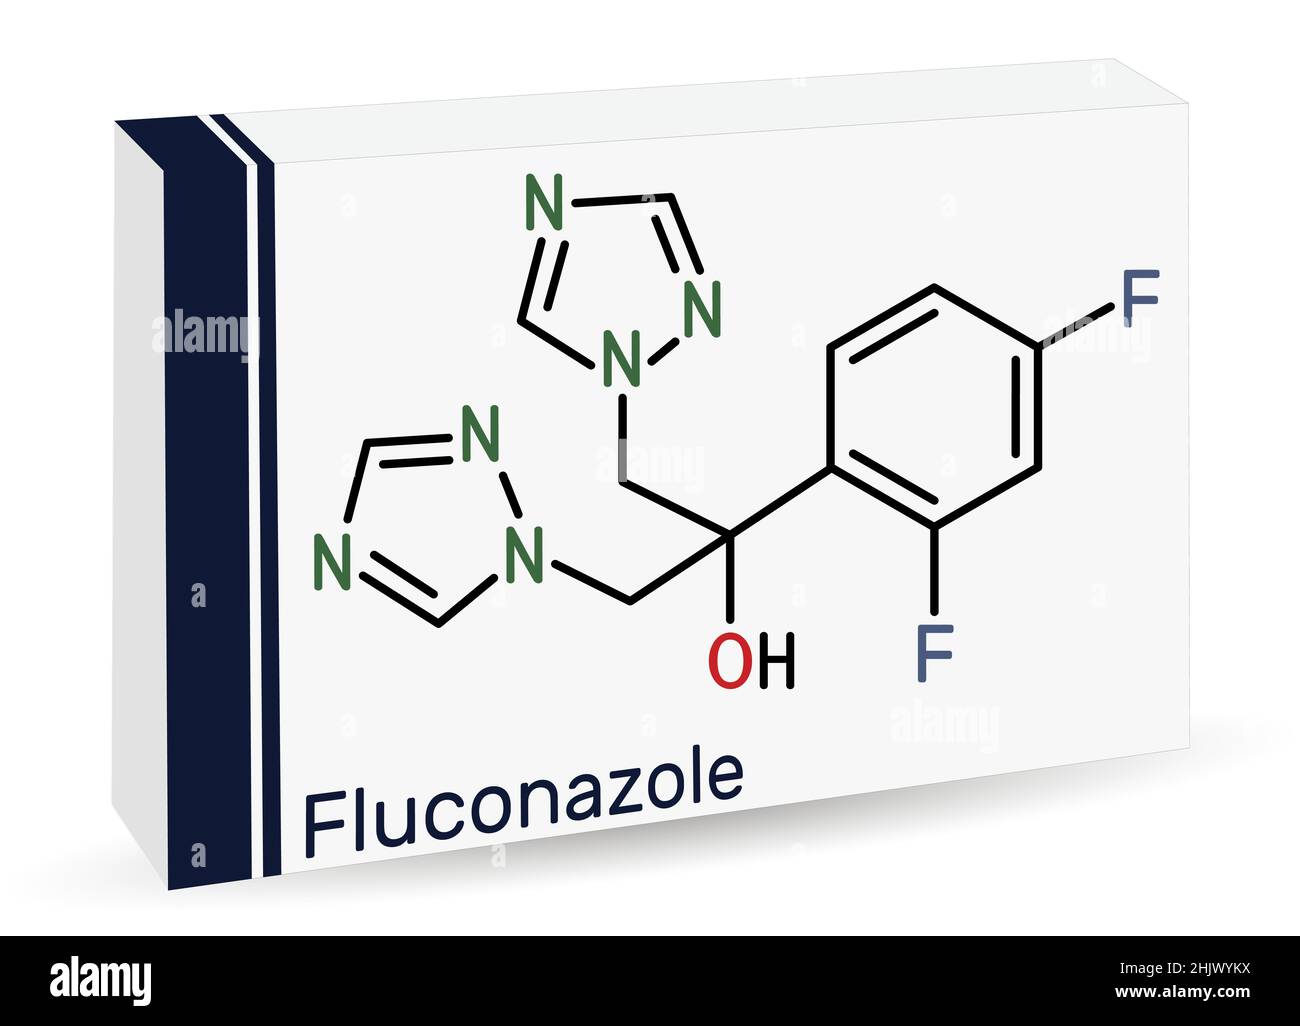 Fluconazole, molecule. It is triazole antifungal medication used to treat fungal infections, candidiasis. Skeletal chemical formula. Paper packaging f Stock Vector